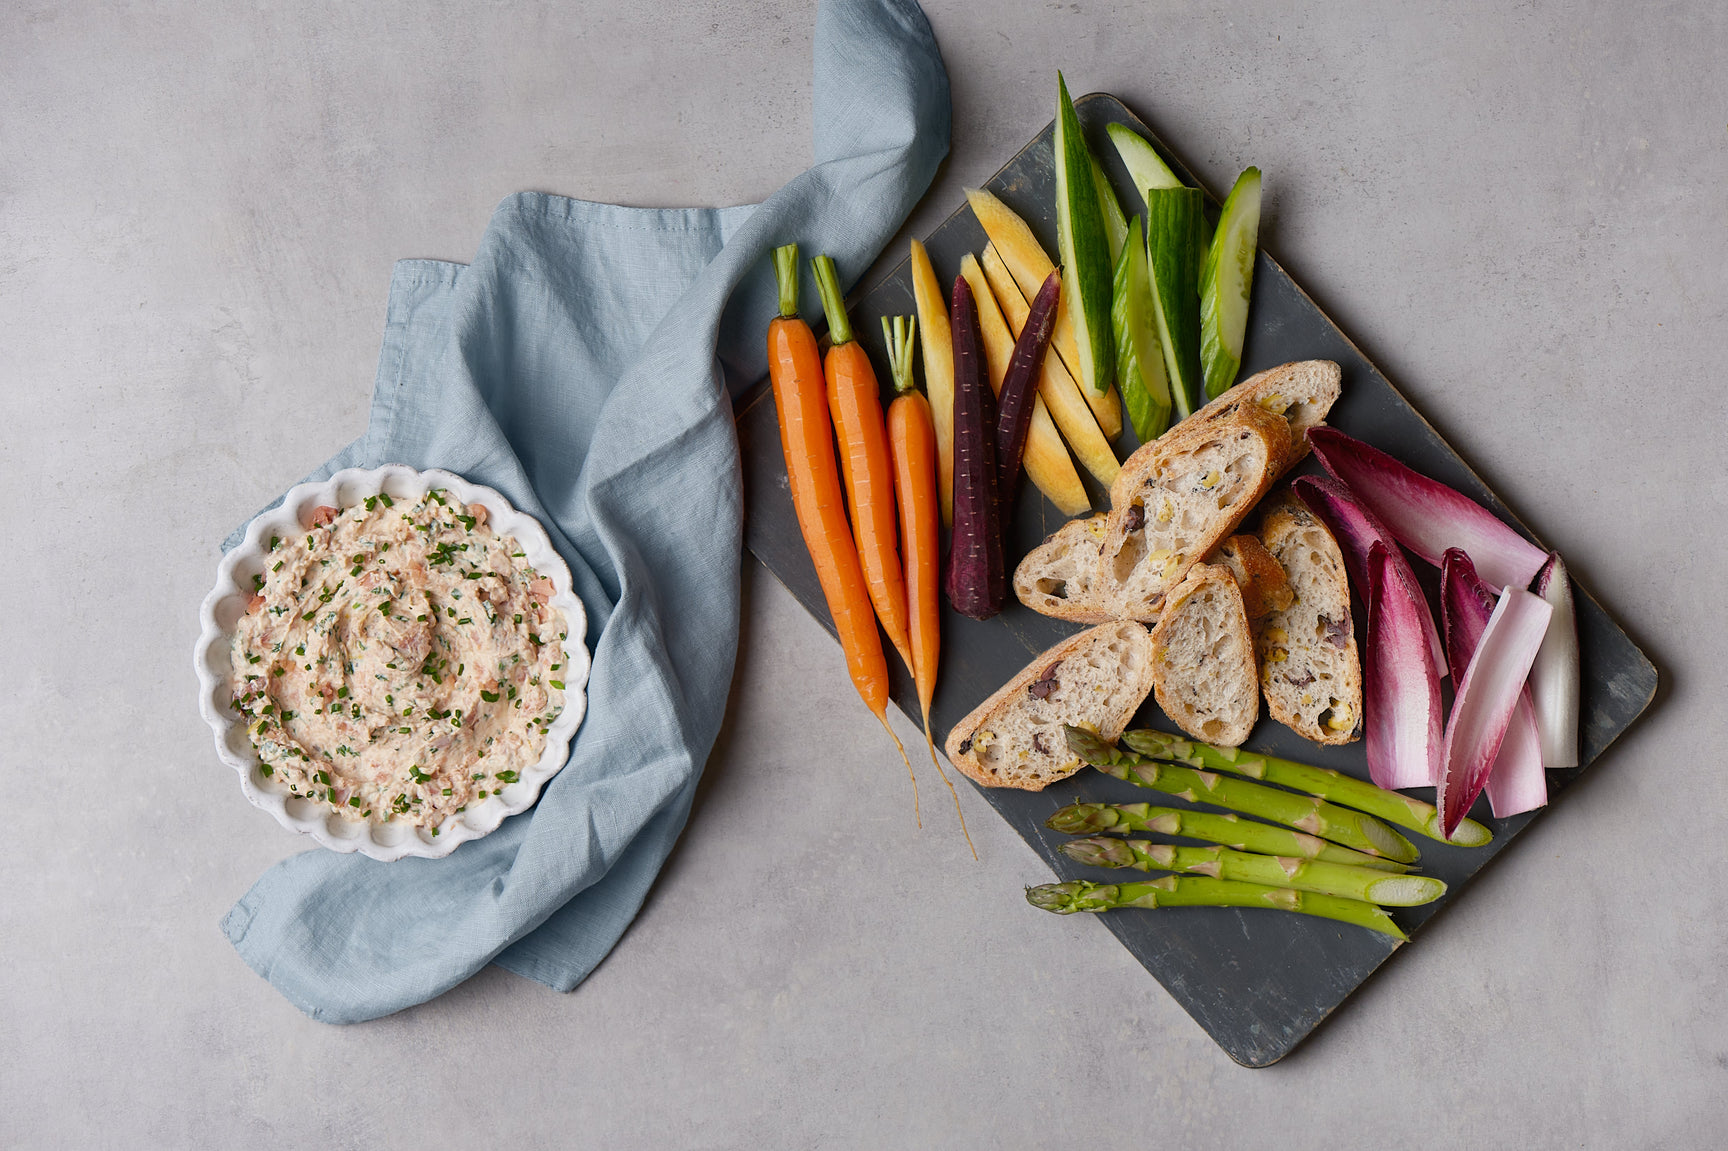 Smoked keta salmon rillettes with crusty bread and crudités